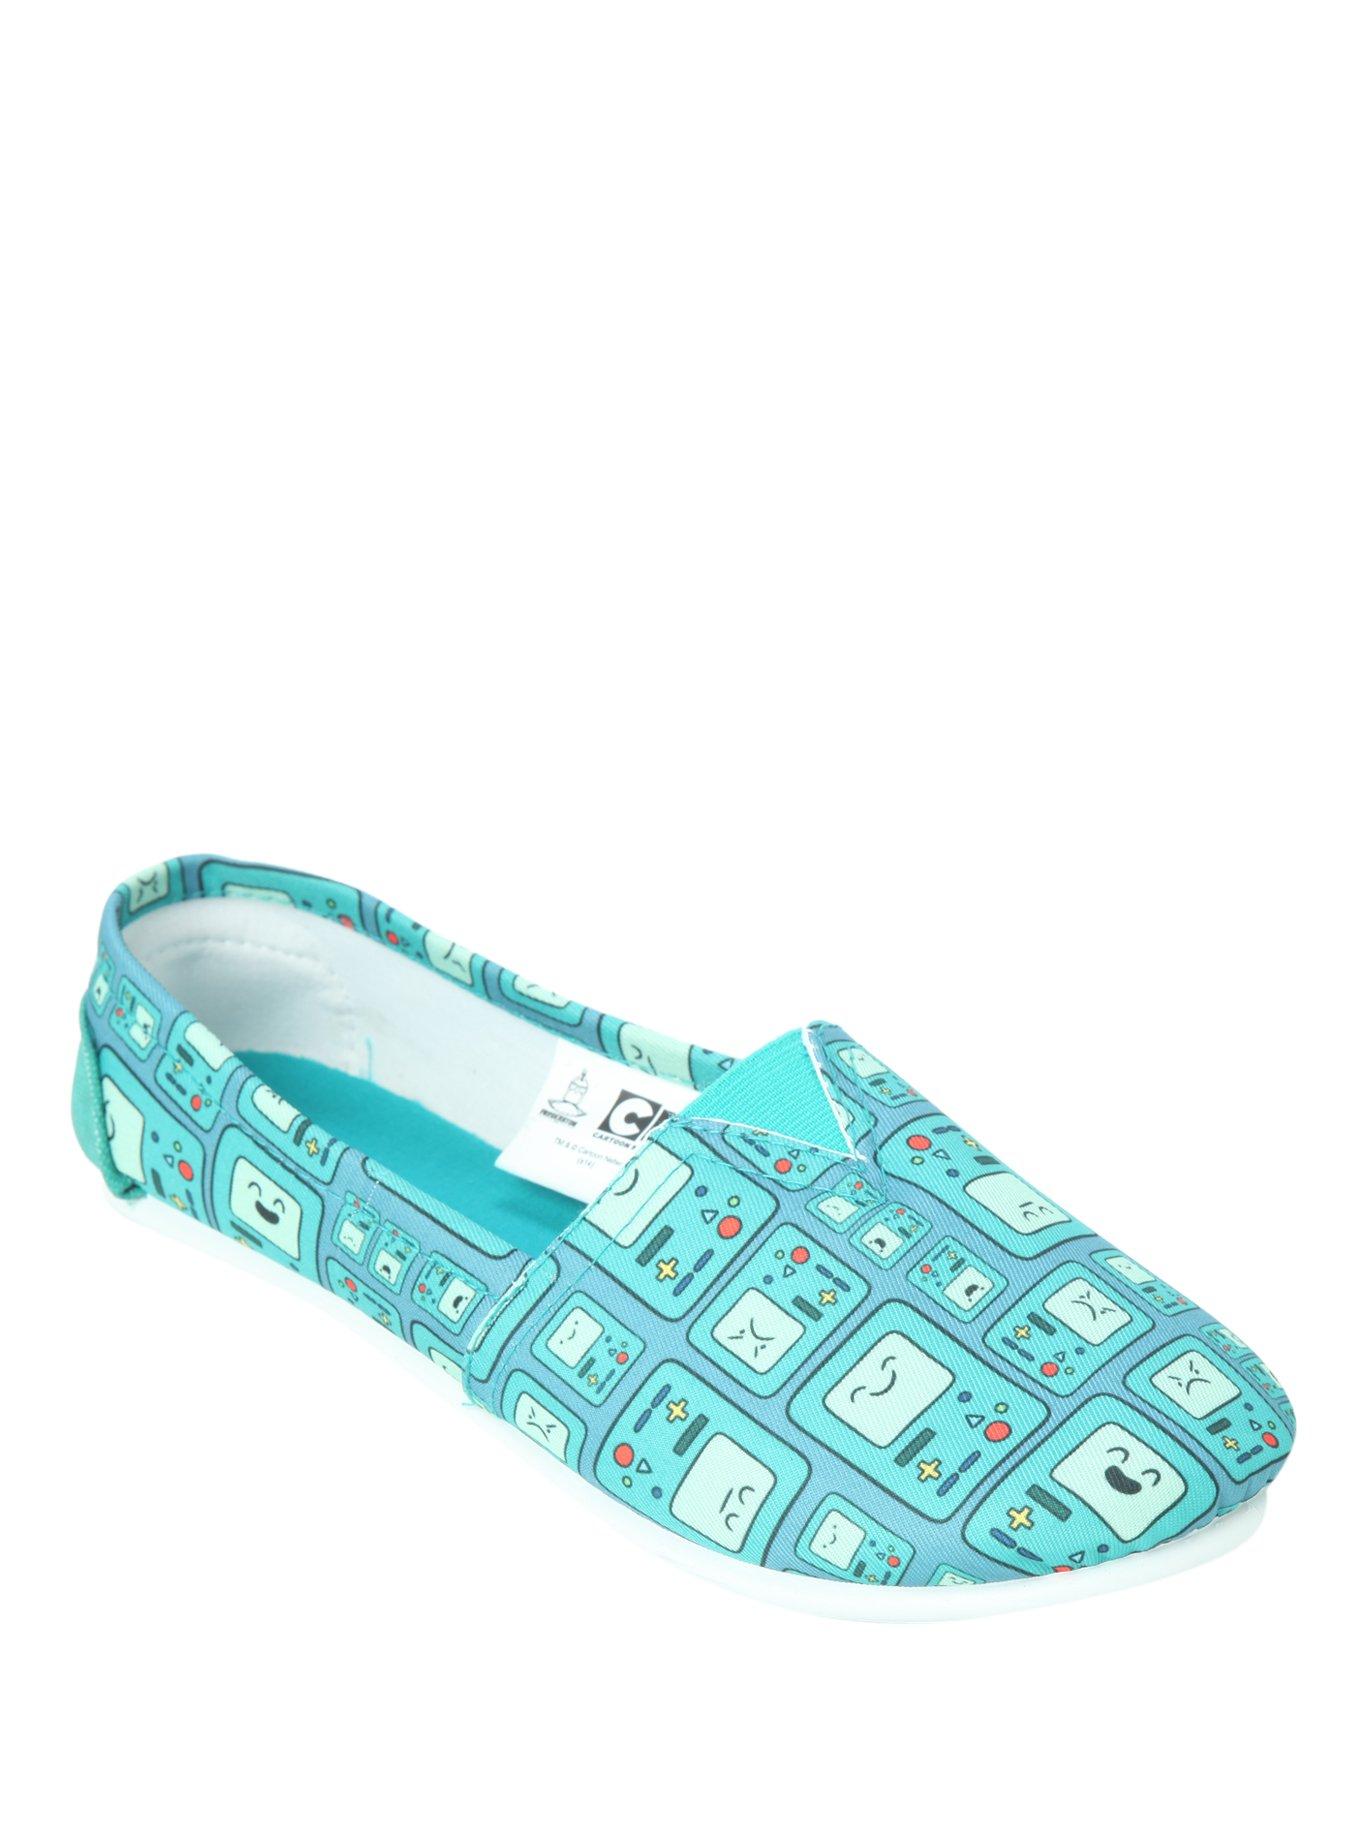 Adventure Time BMO Slip-On Shoes, TURQUOISE, hi-res